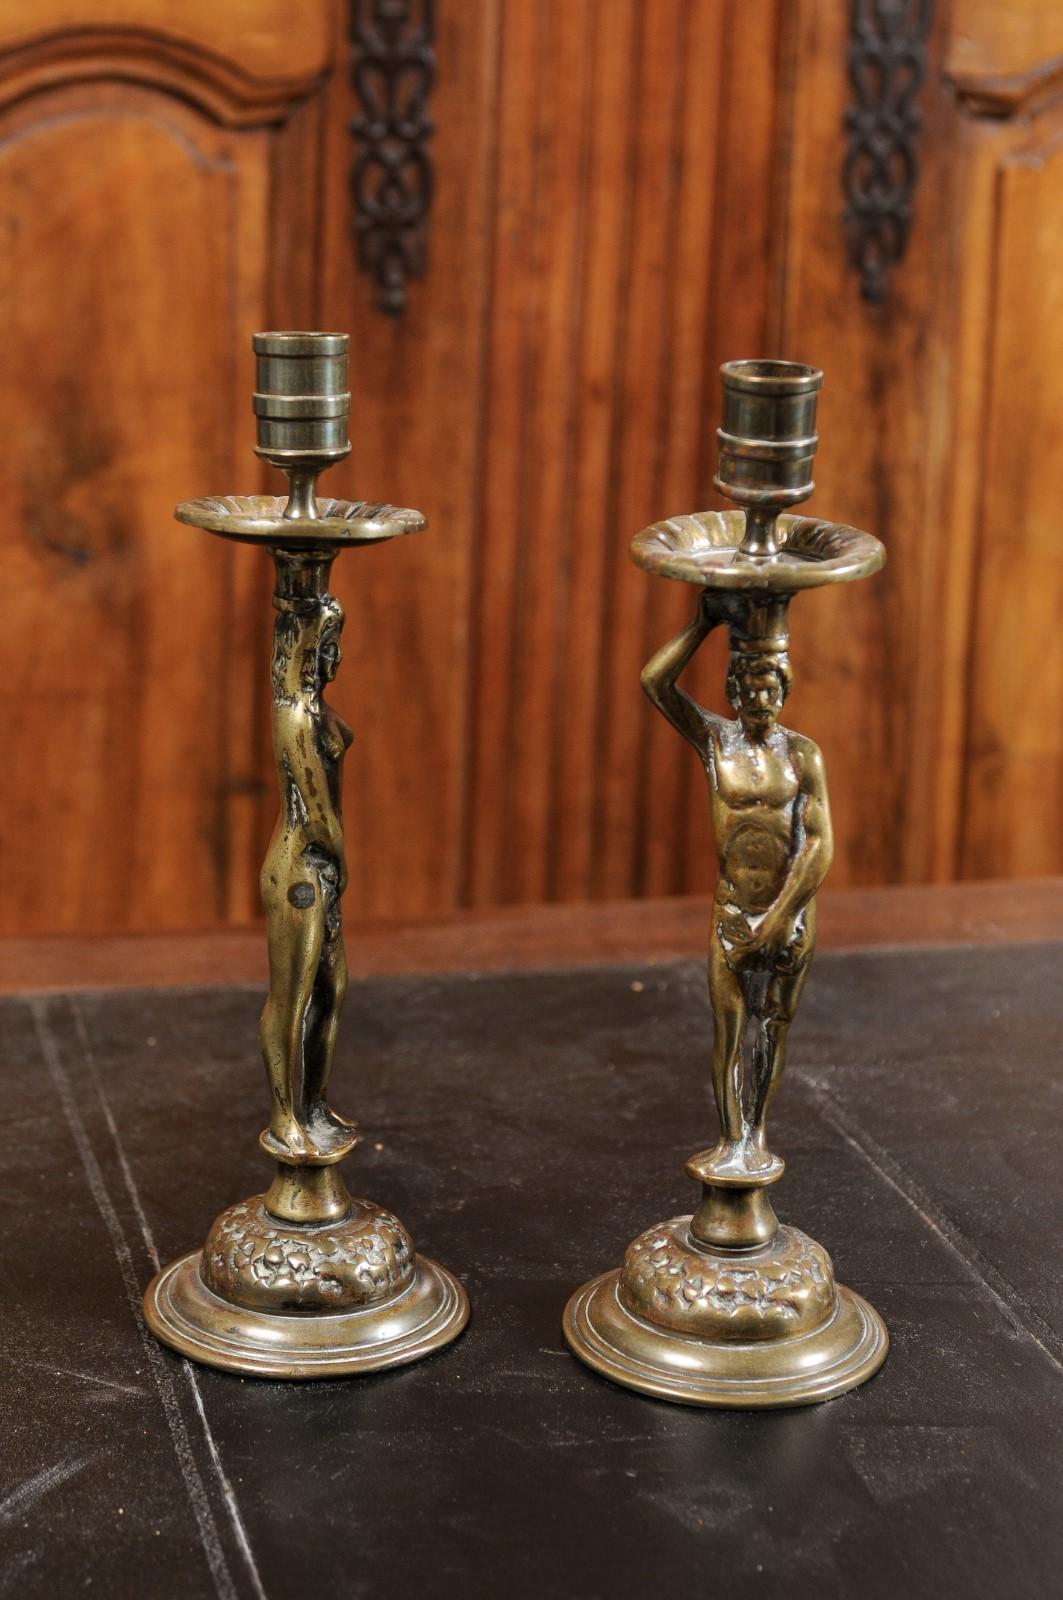 A pair of English Victorian period Adam and Eve brass candlesticks from the 19th century, on circular bases. Created in England during the reign of Queen Victoria, this pair of brass candlesticks features a man and woman, likely Adam and Eve